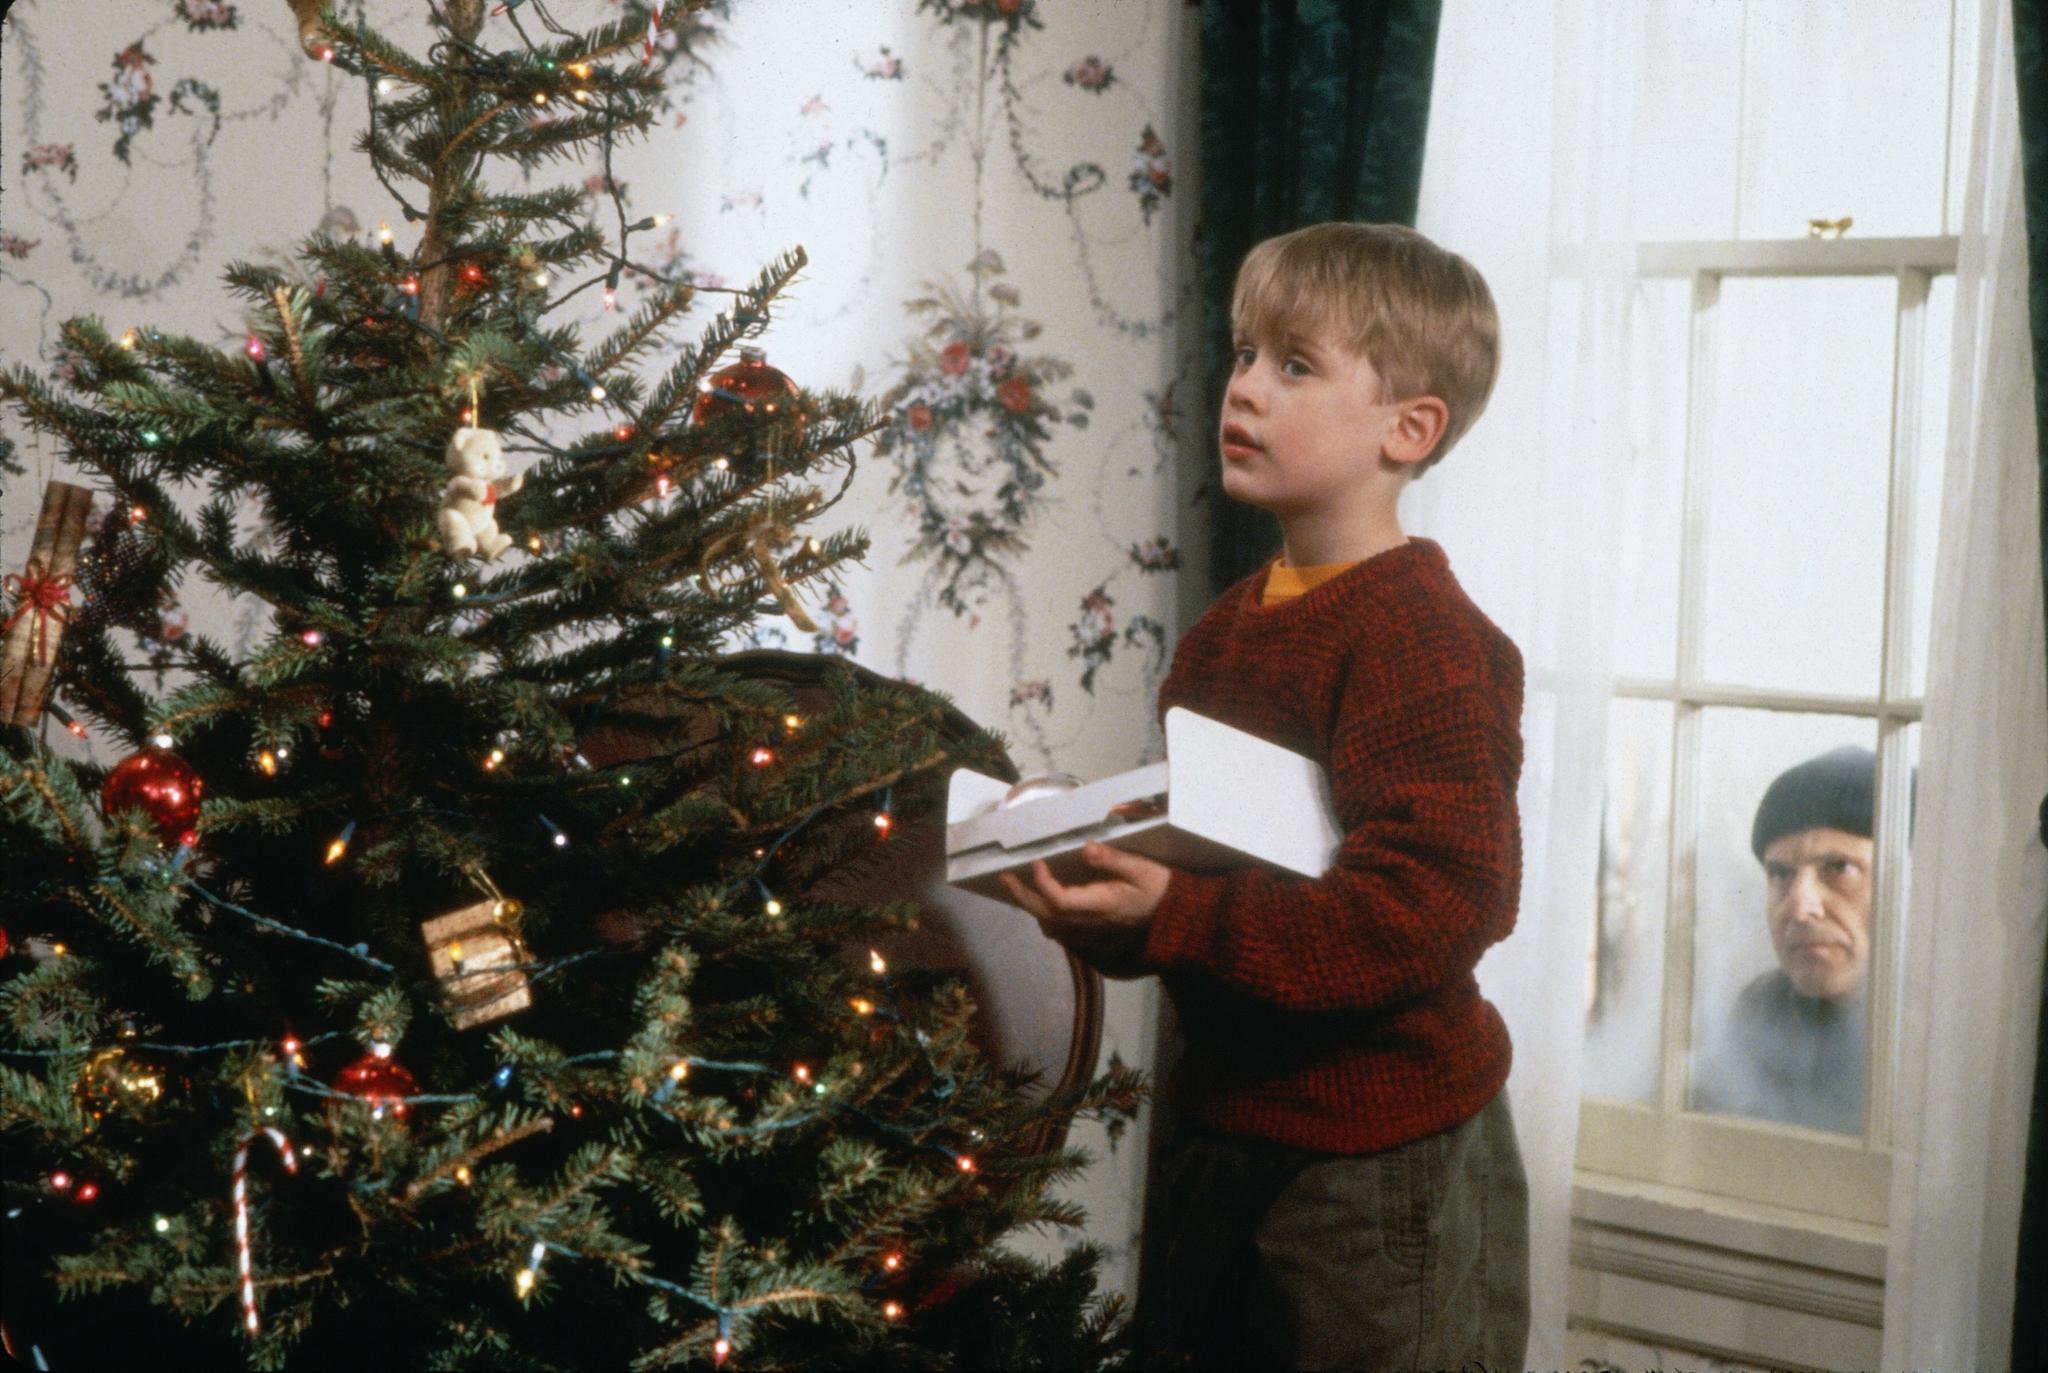 Home Alone Wallpapers, Desk 4K Wallpaper of Home Alone